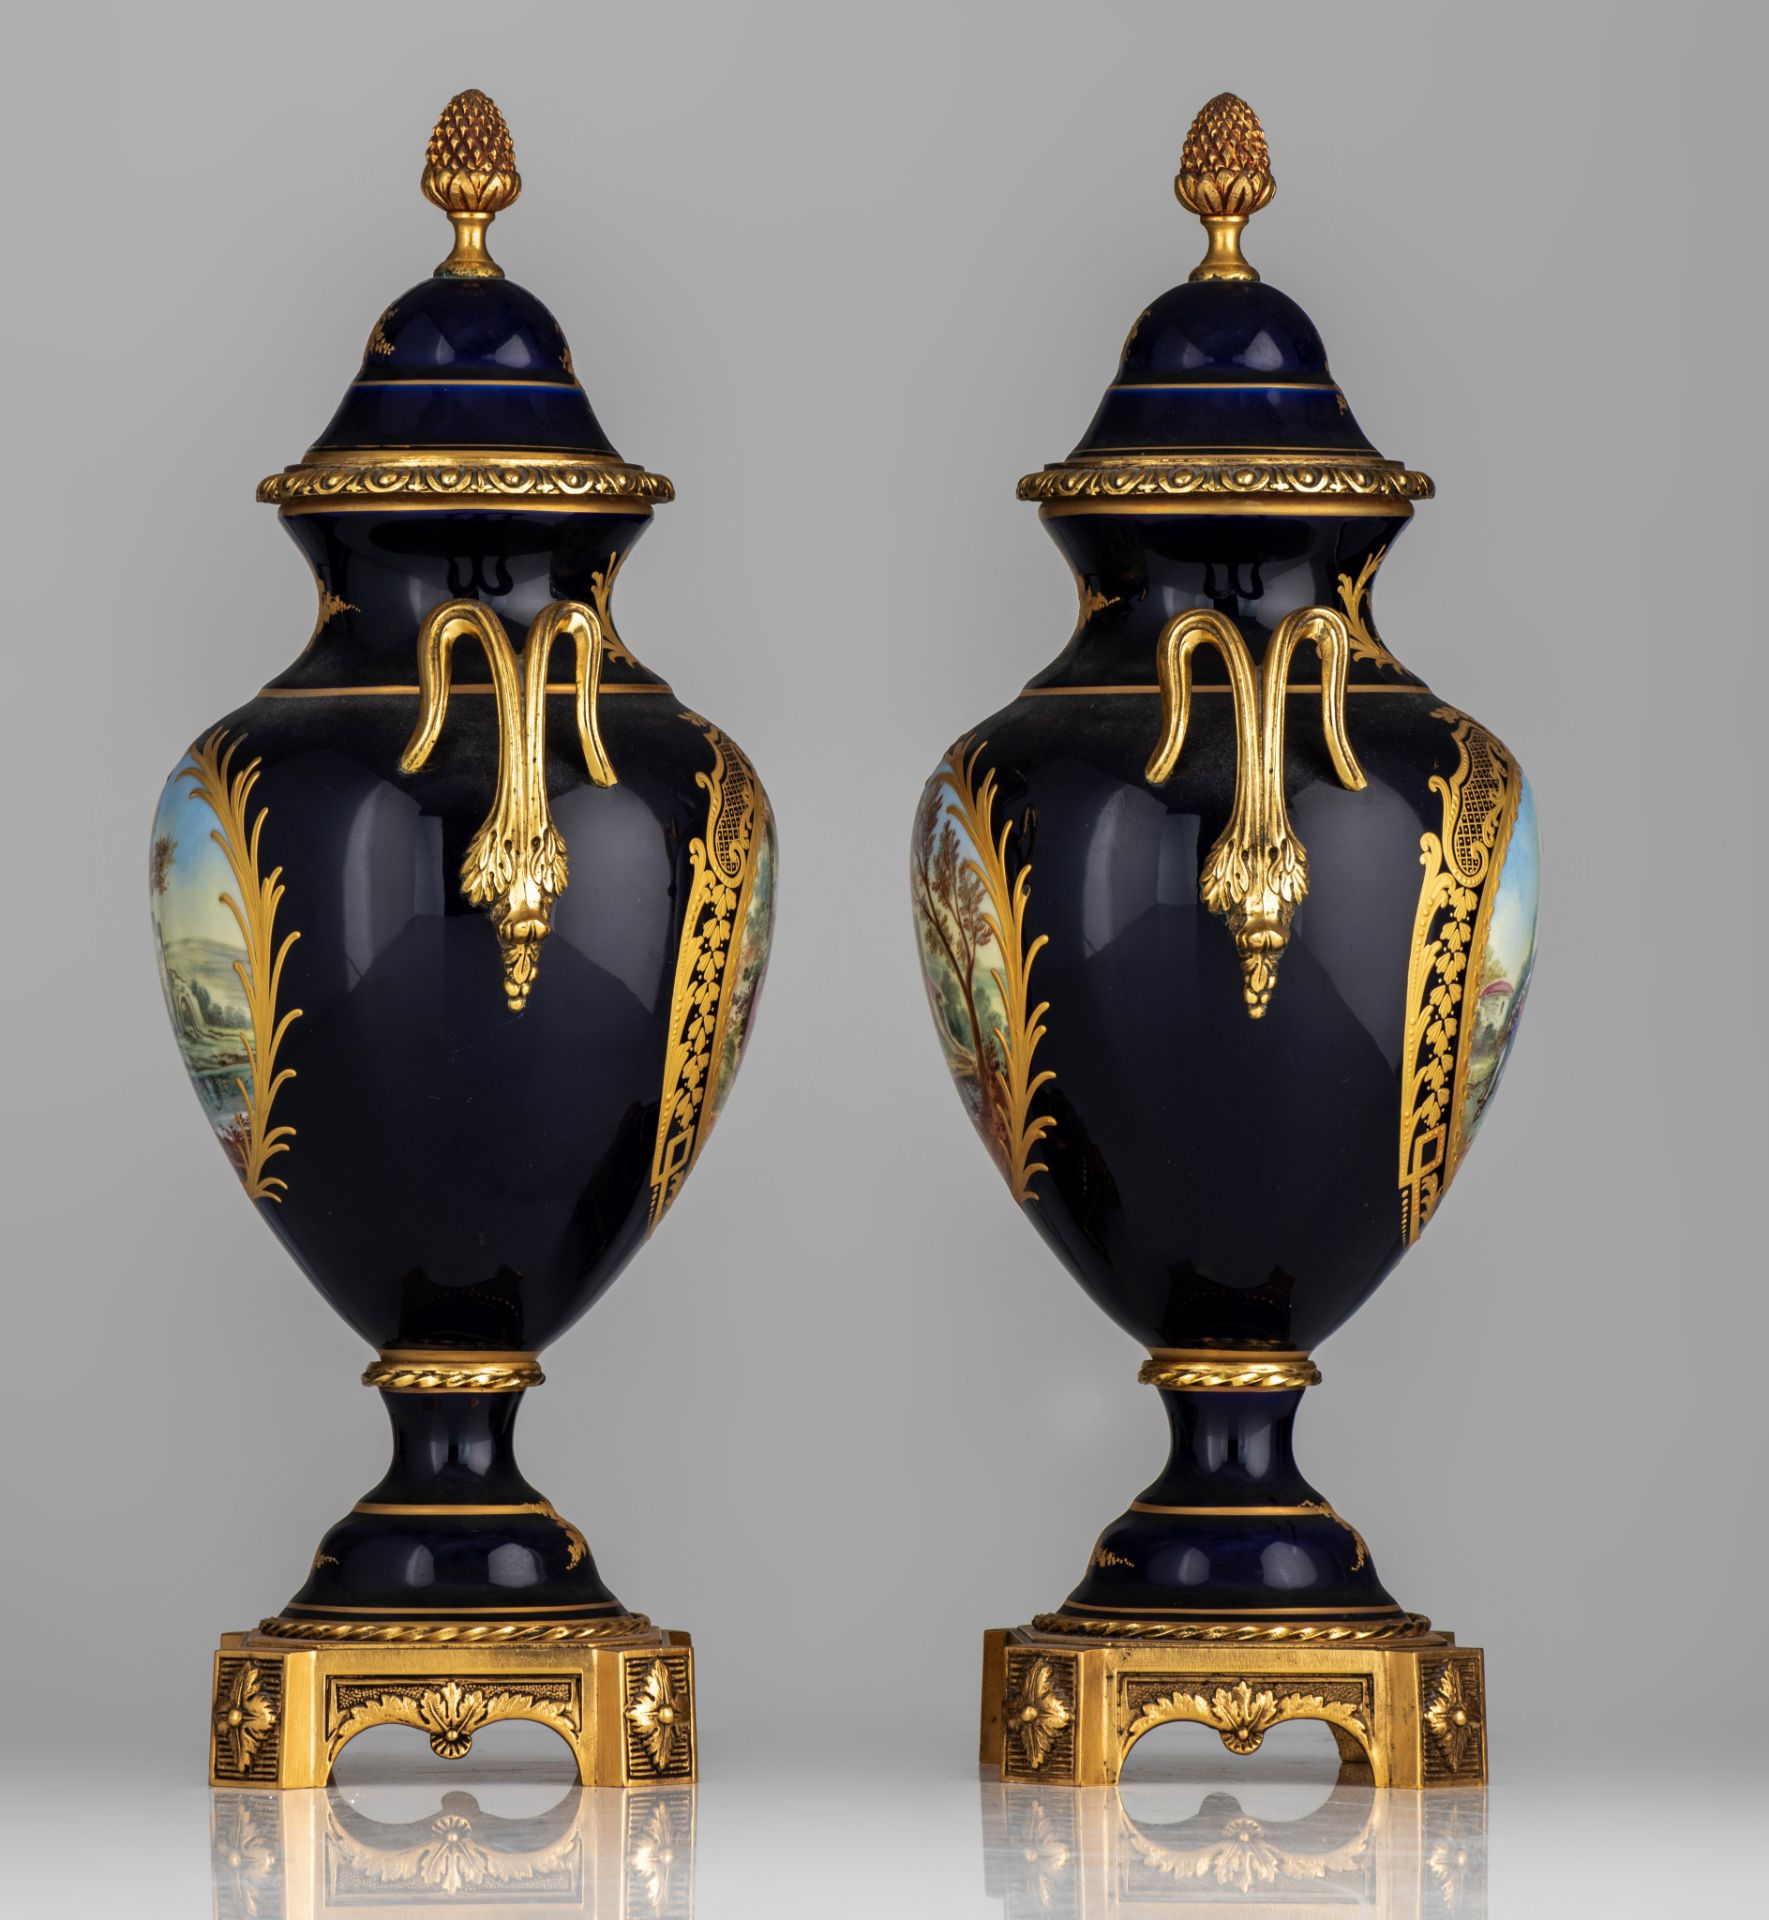 A three-piece Sèvres garniture set, decorated with gallant scenes, signed 'J. Césana', H 28,5 - 42,5 - Image 11 of 15